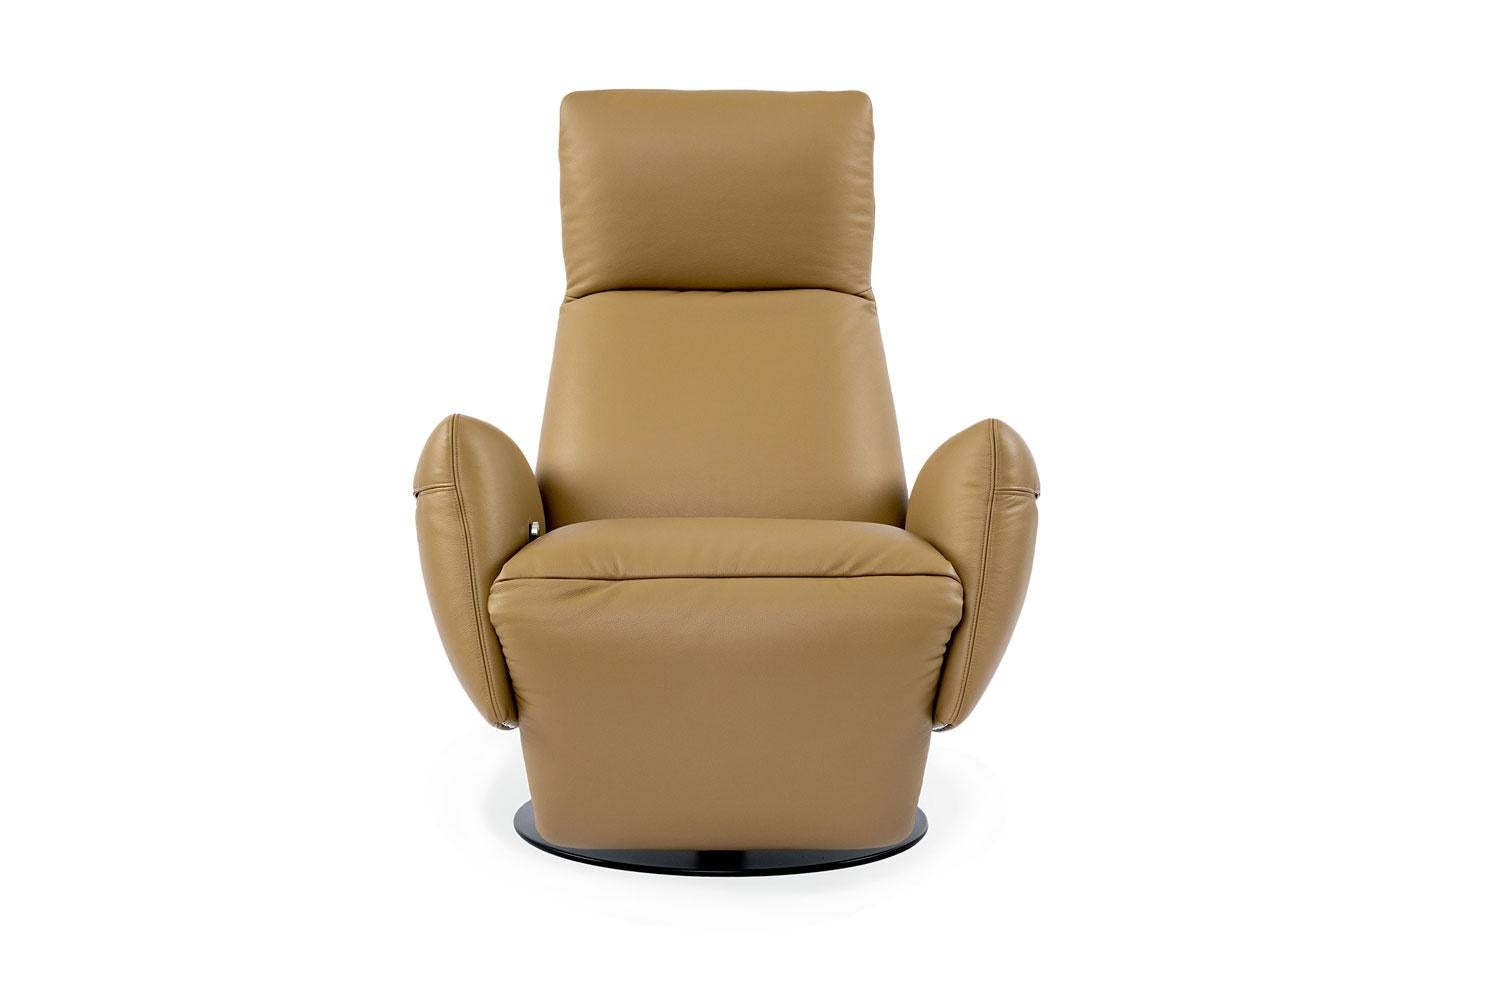 The pillow Recliner by Poltrona Frau

The Pillow armchair designed by Poltrona Frau R. & D. is the most complete aesthetic and functional expression of the reclinable seat. It is completely covered in soft neutral leather upholstery and the